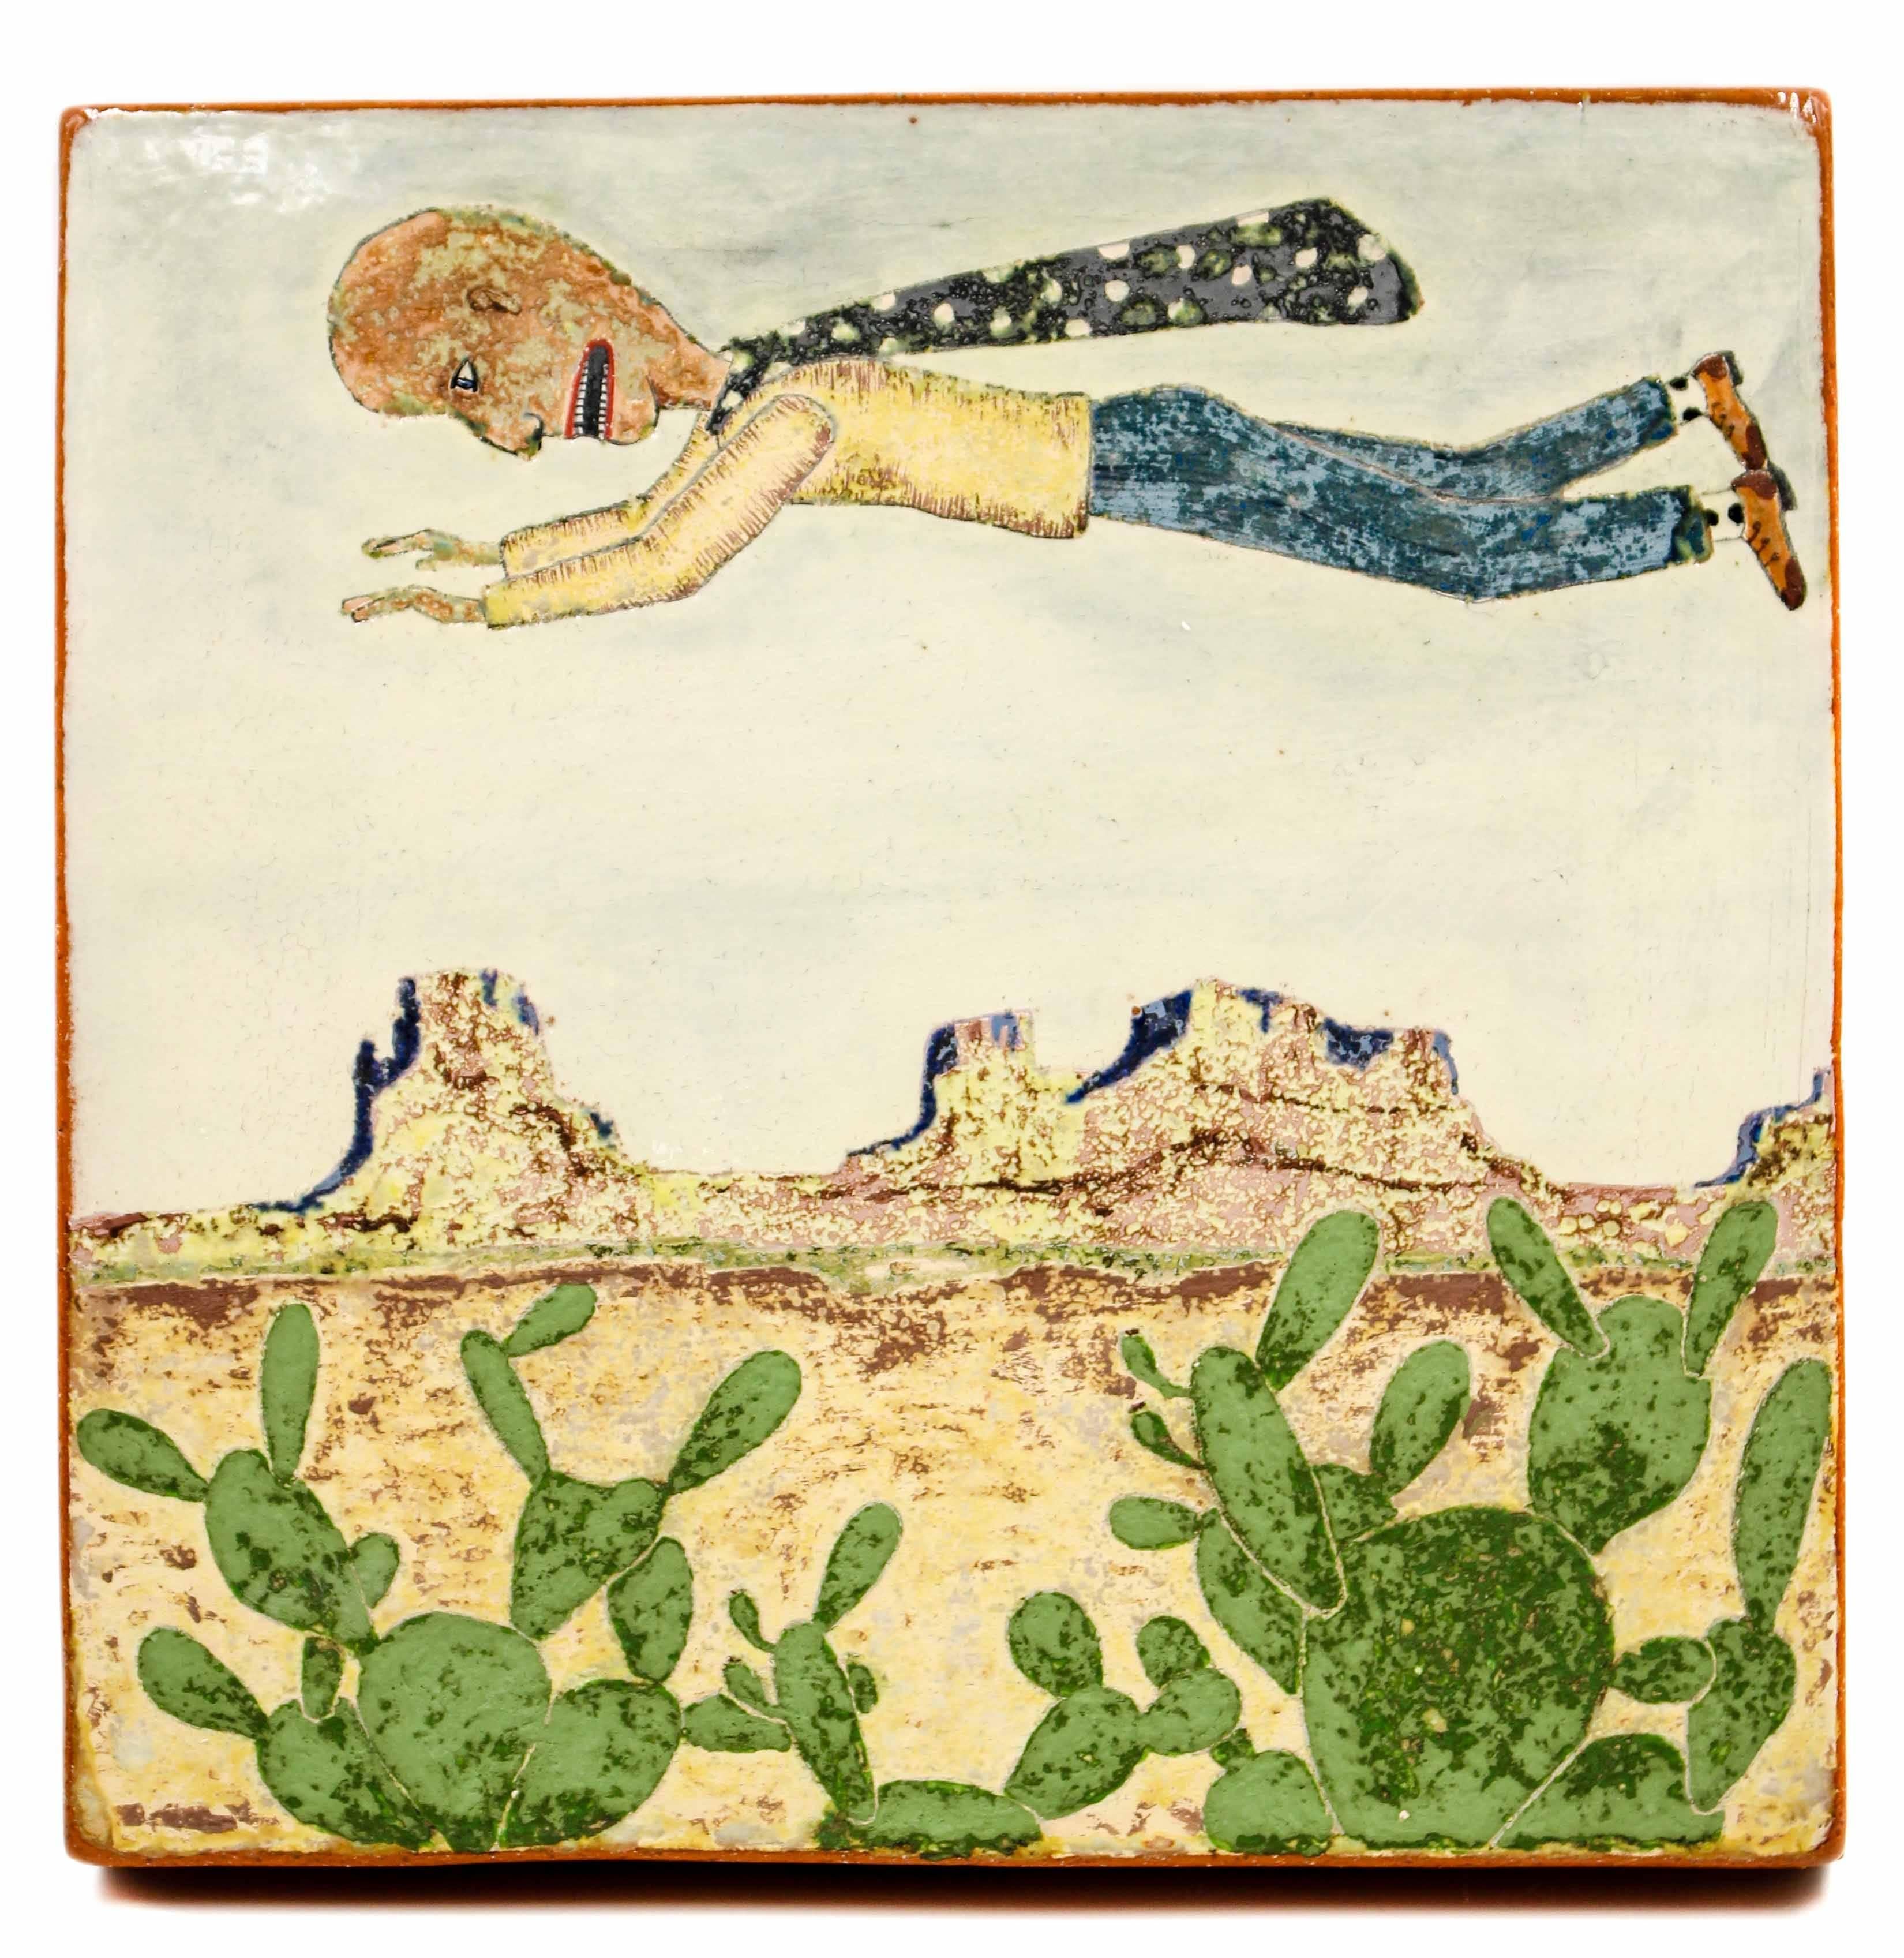 Flying Over Cactus  - Painting by Wesley Anderegg